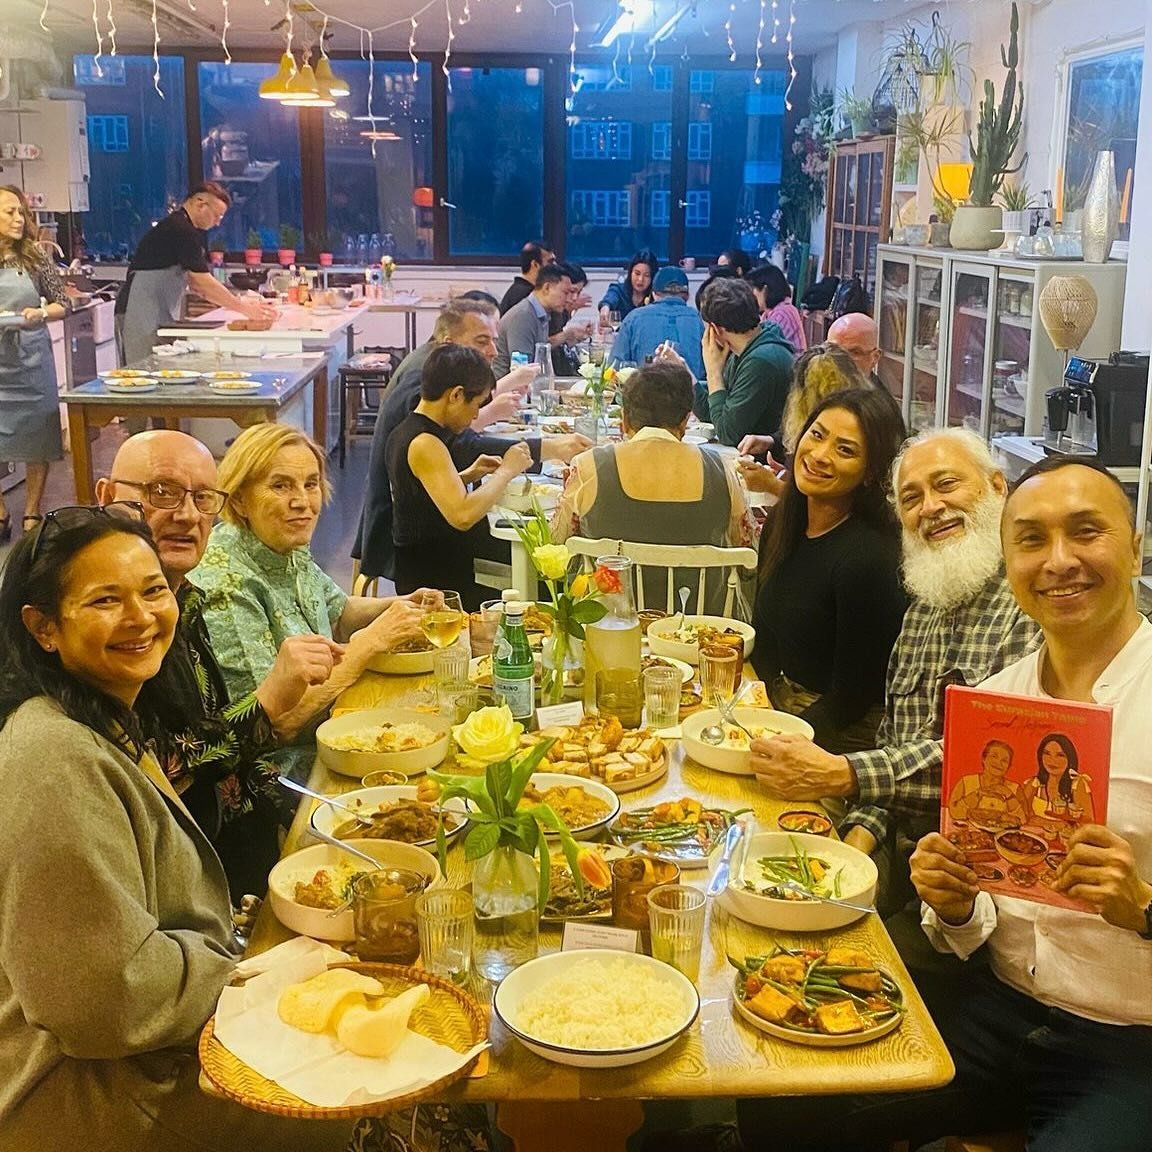 Cooking for fellow foodies in London has been an absolute joy. I want to express my heartfelt gratitude to everyone who attended my inaugural Eurasian Table Supperclub. It was immensely satisfying to see empty plates and smiling faces, especially fro